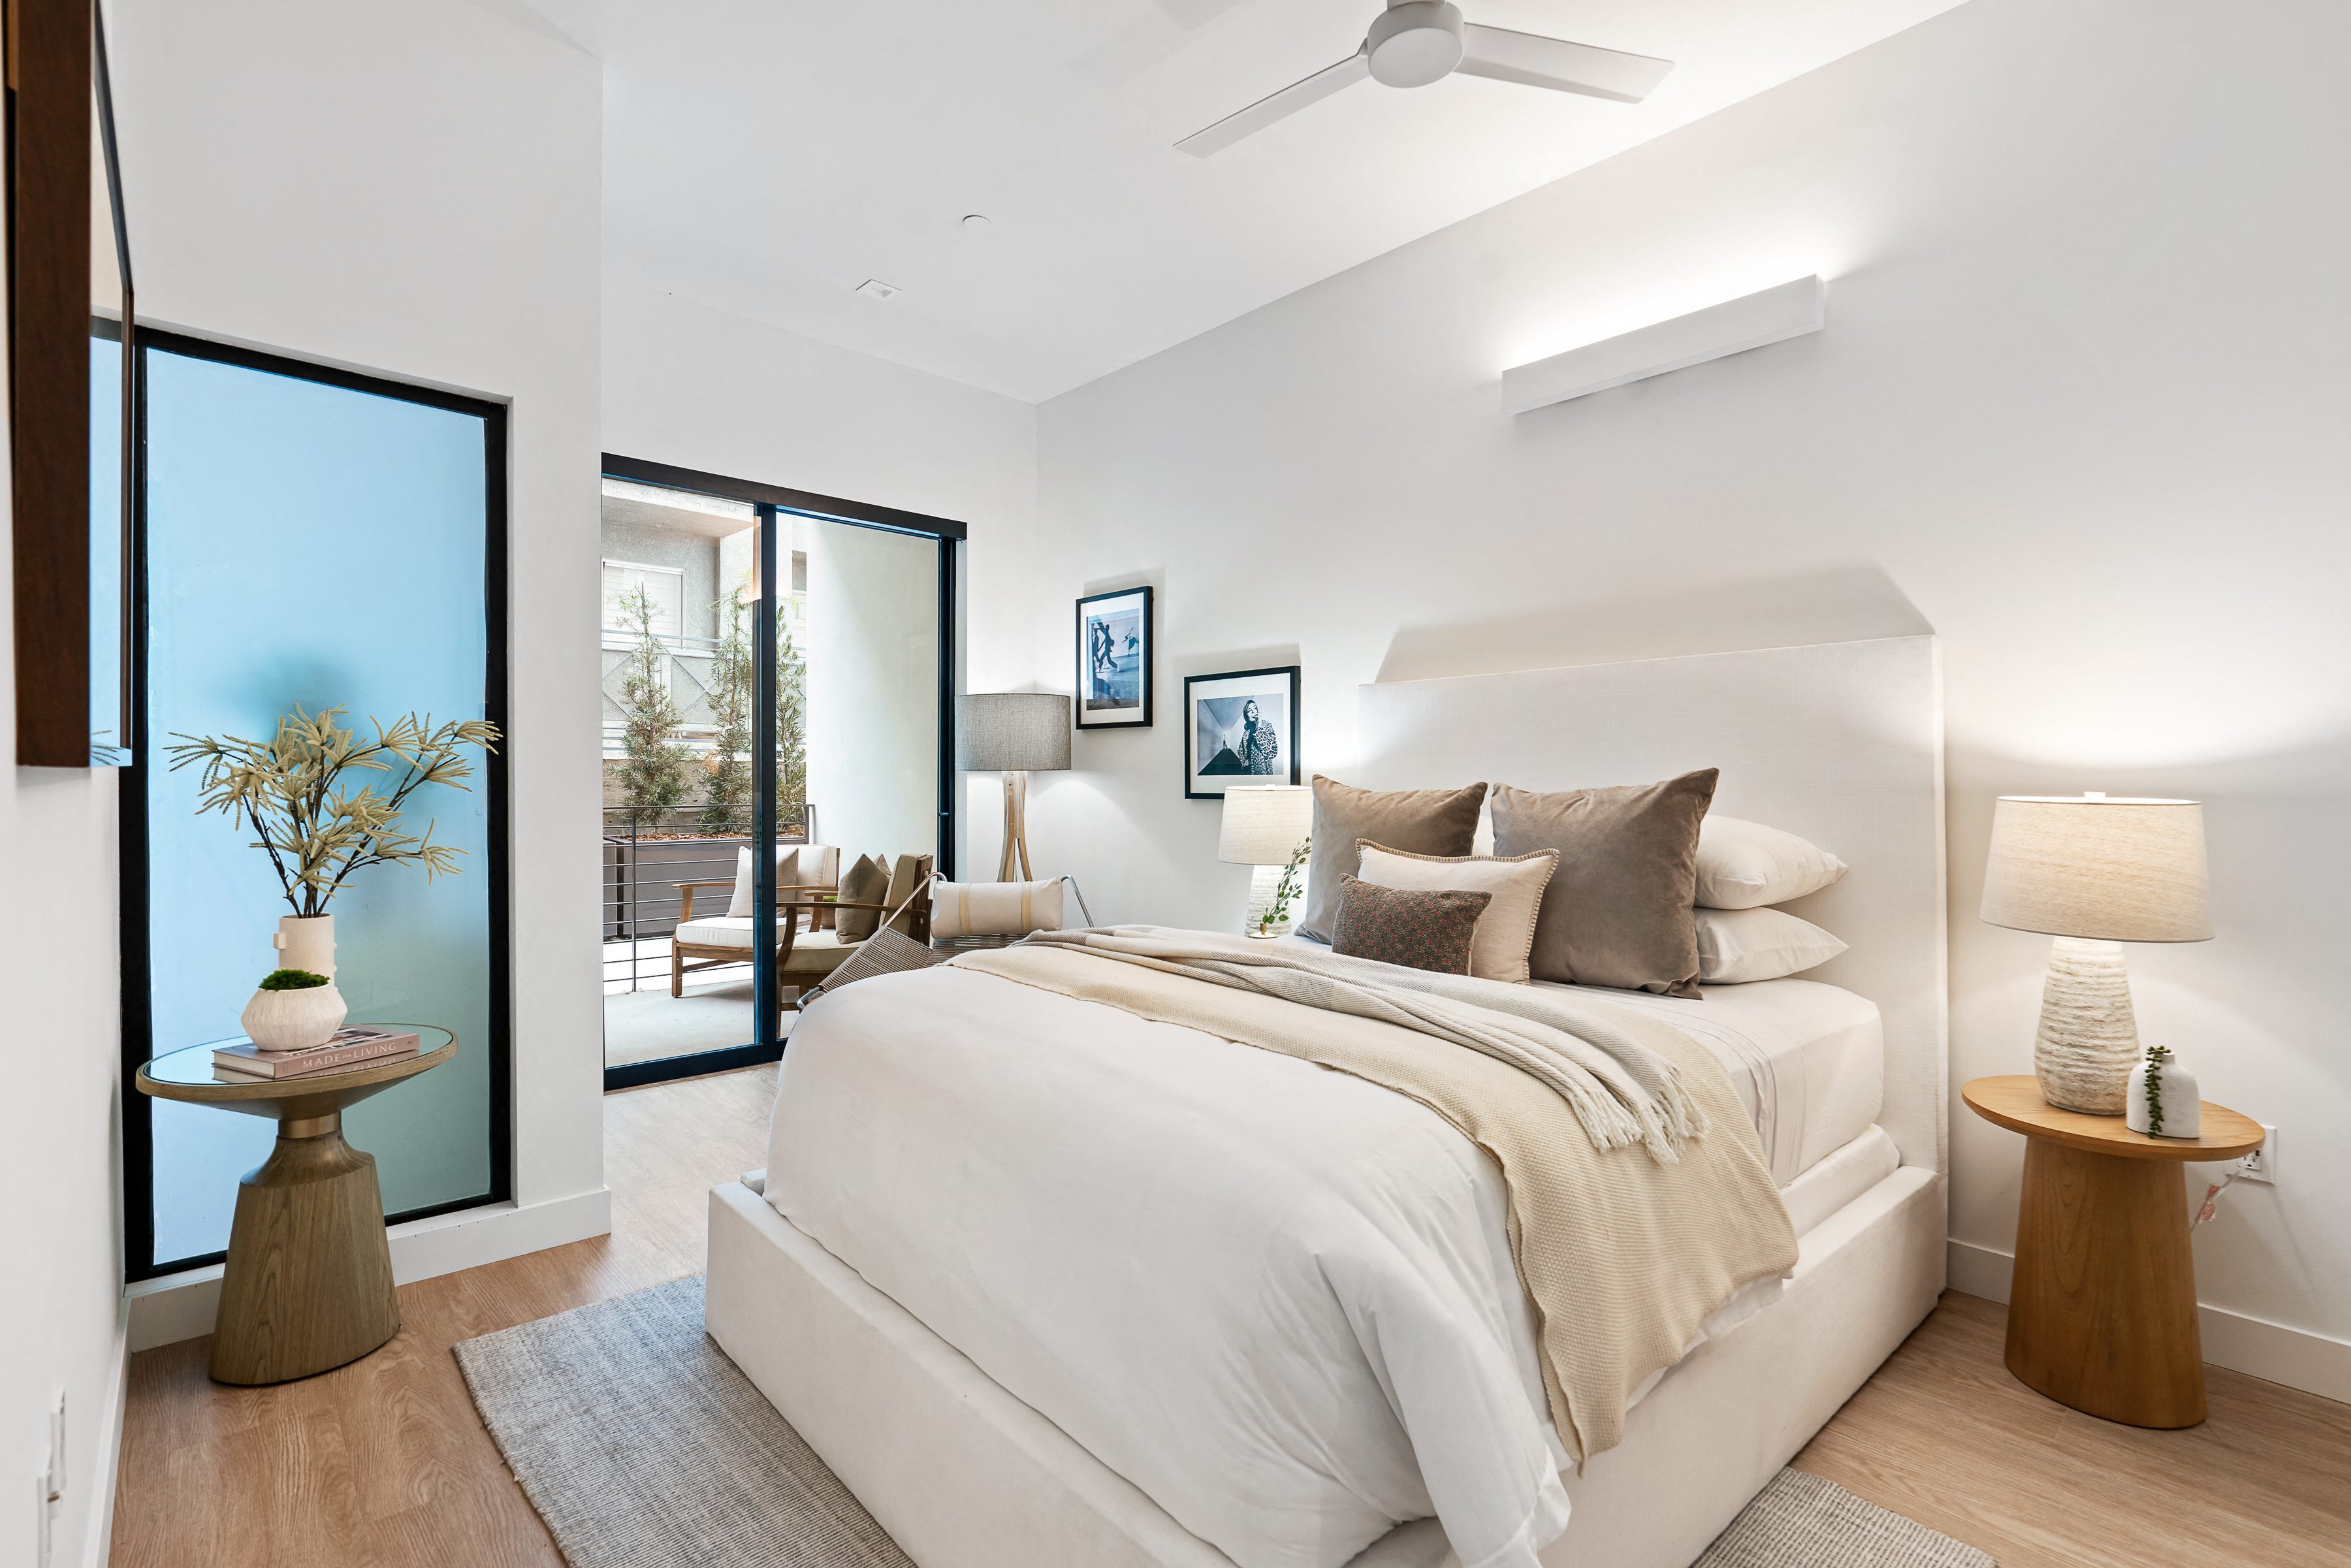 Large bedrooms with ceiling fans